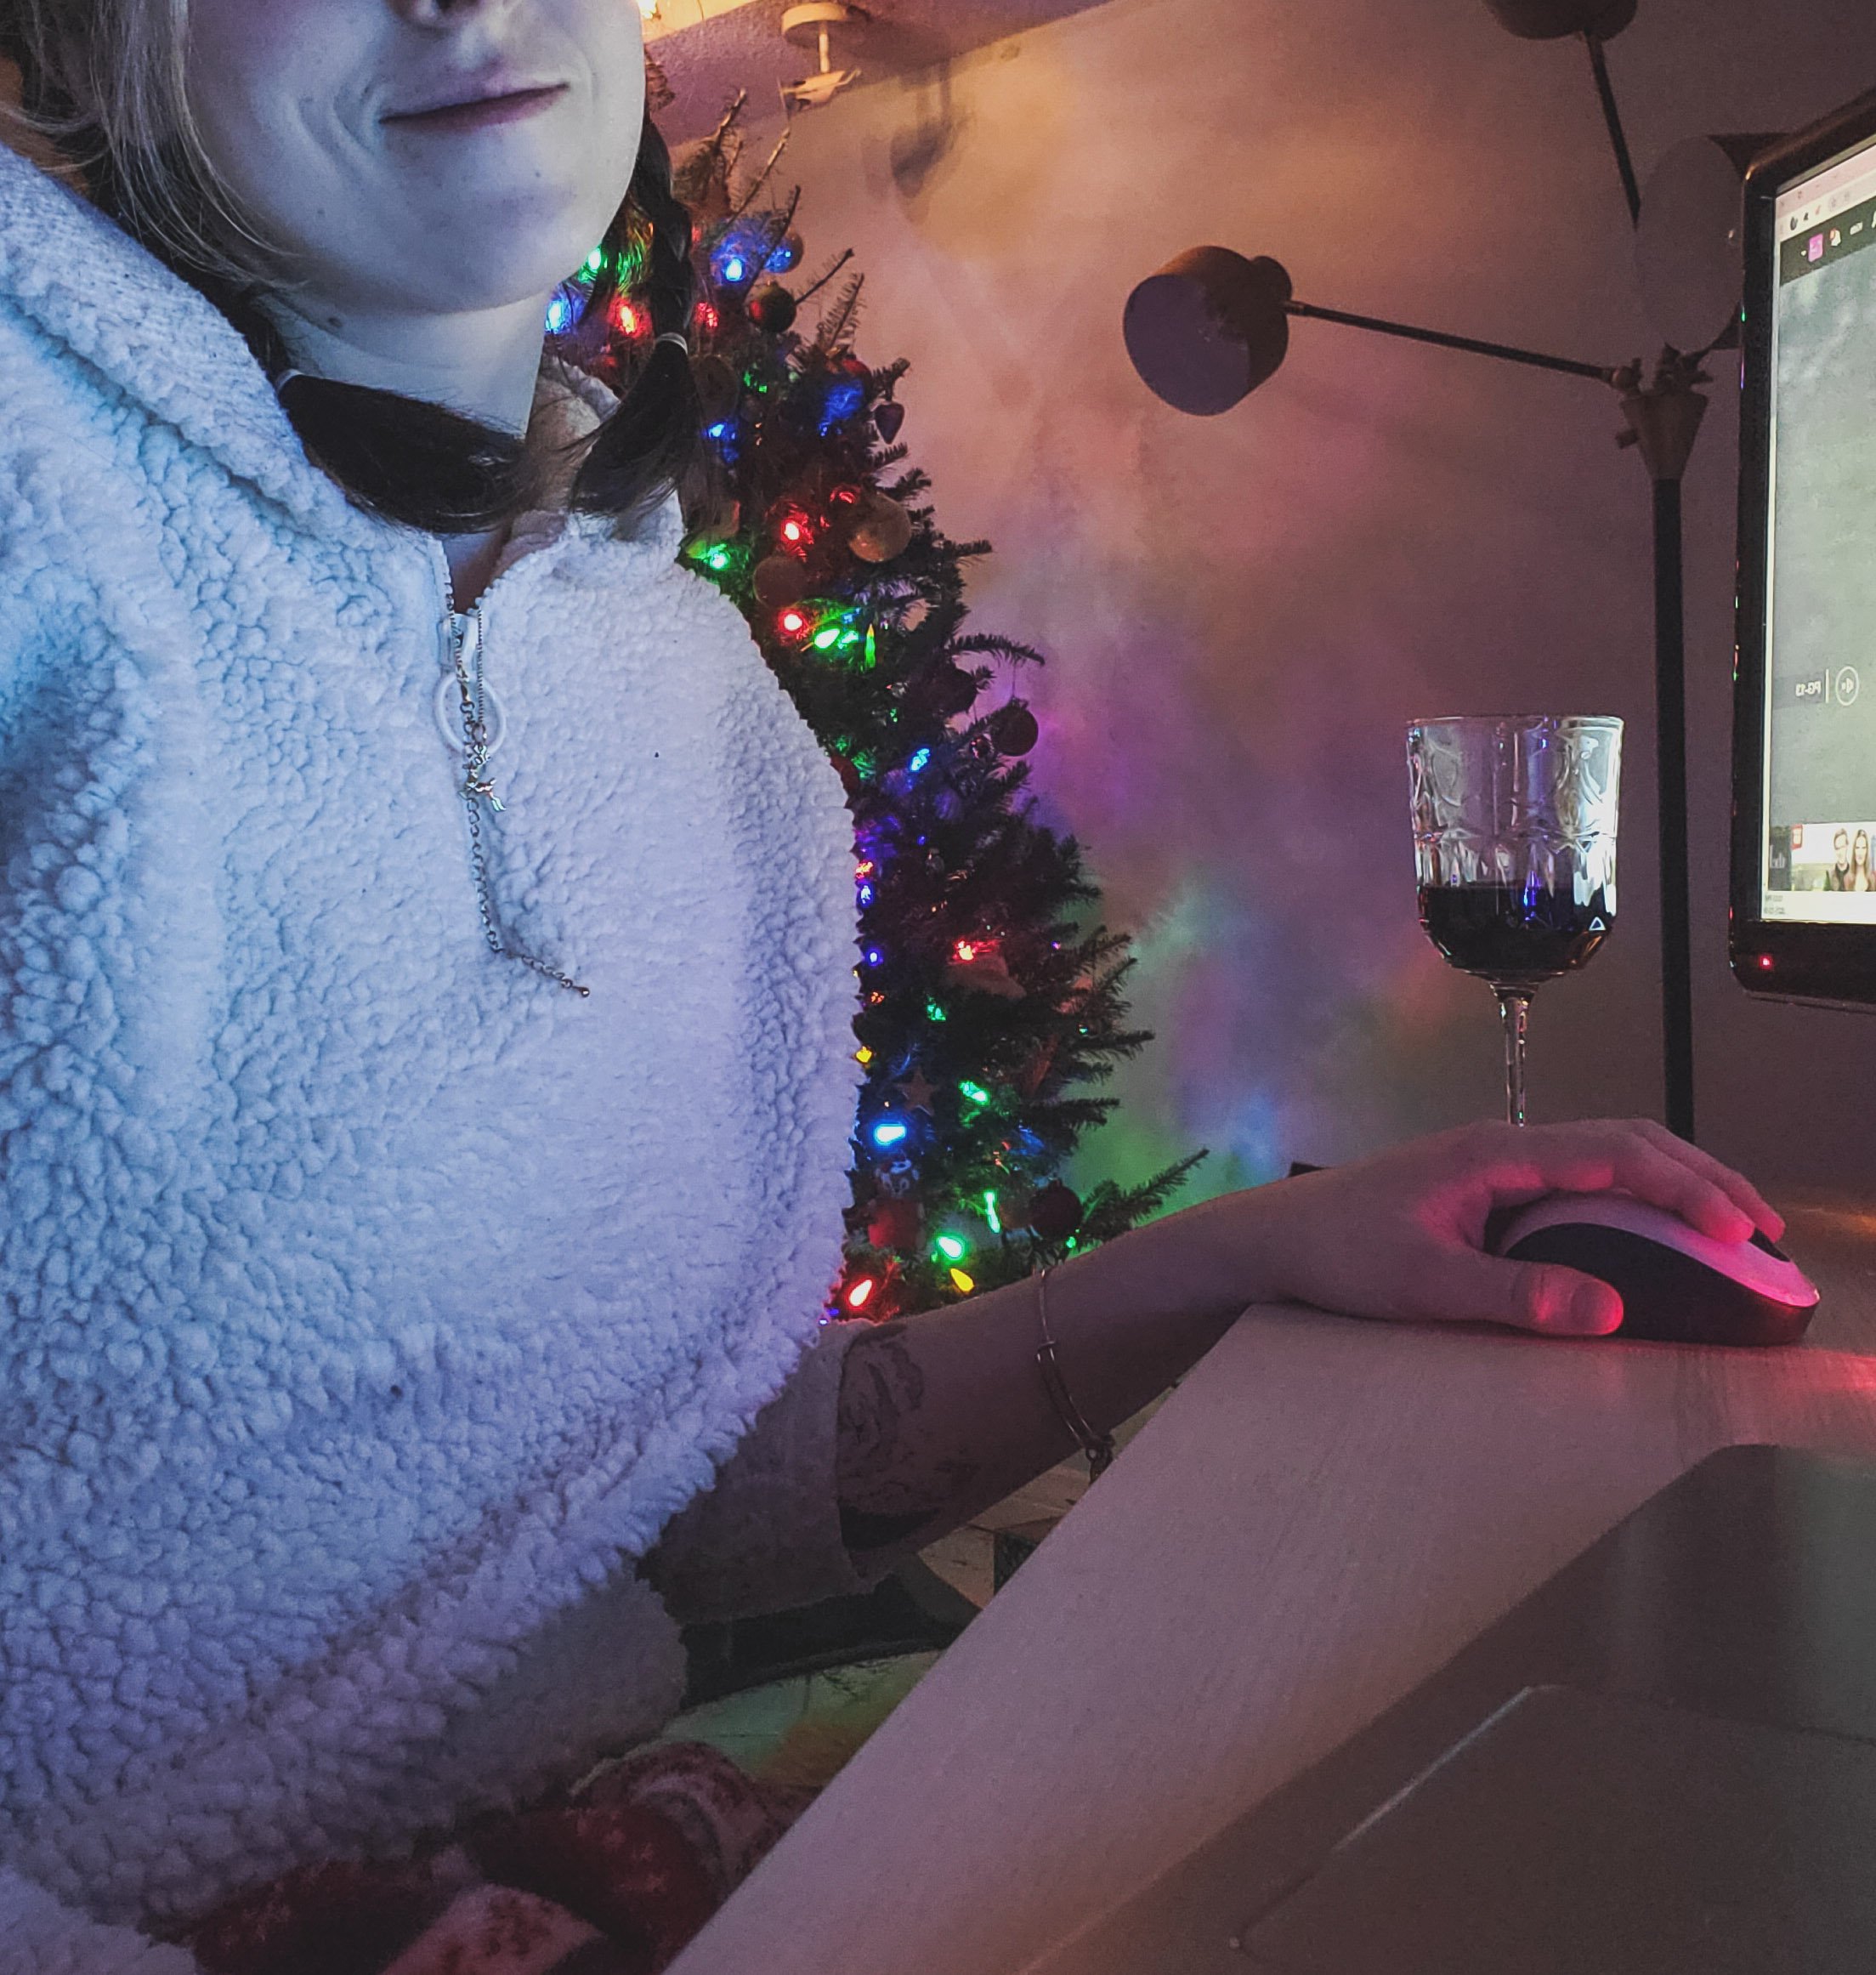  Gaming by the tree! I am building a Christmas Treehouse cabin because that’s where I wish I was instead of working in a mall. 